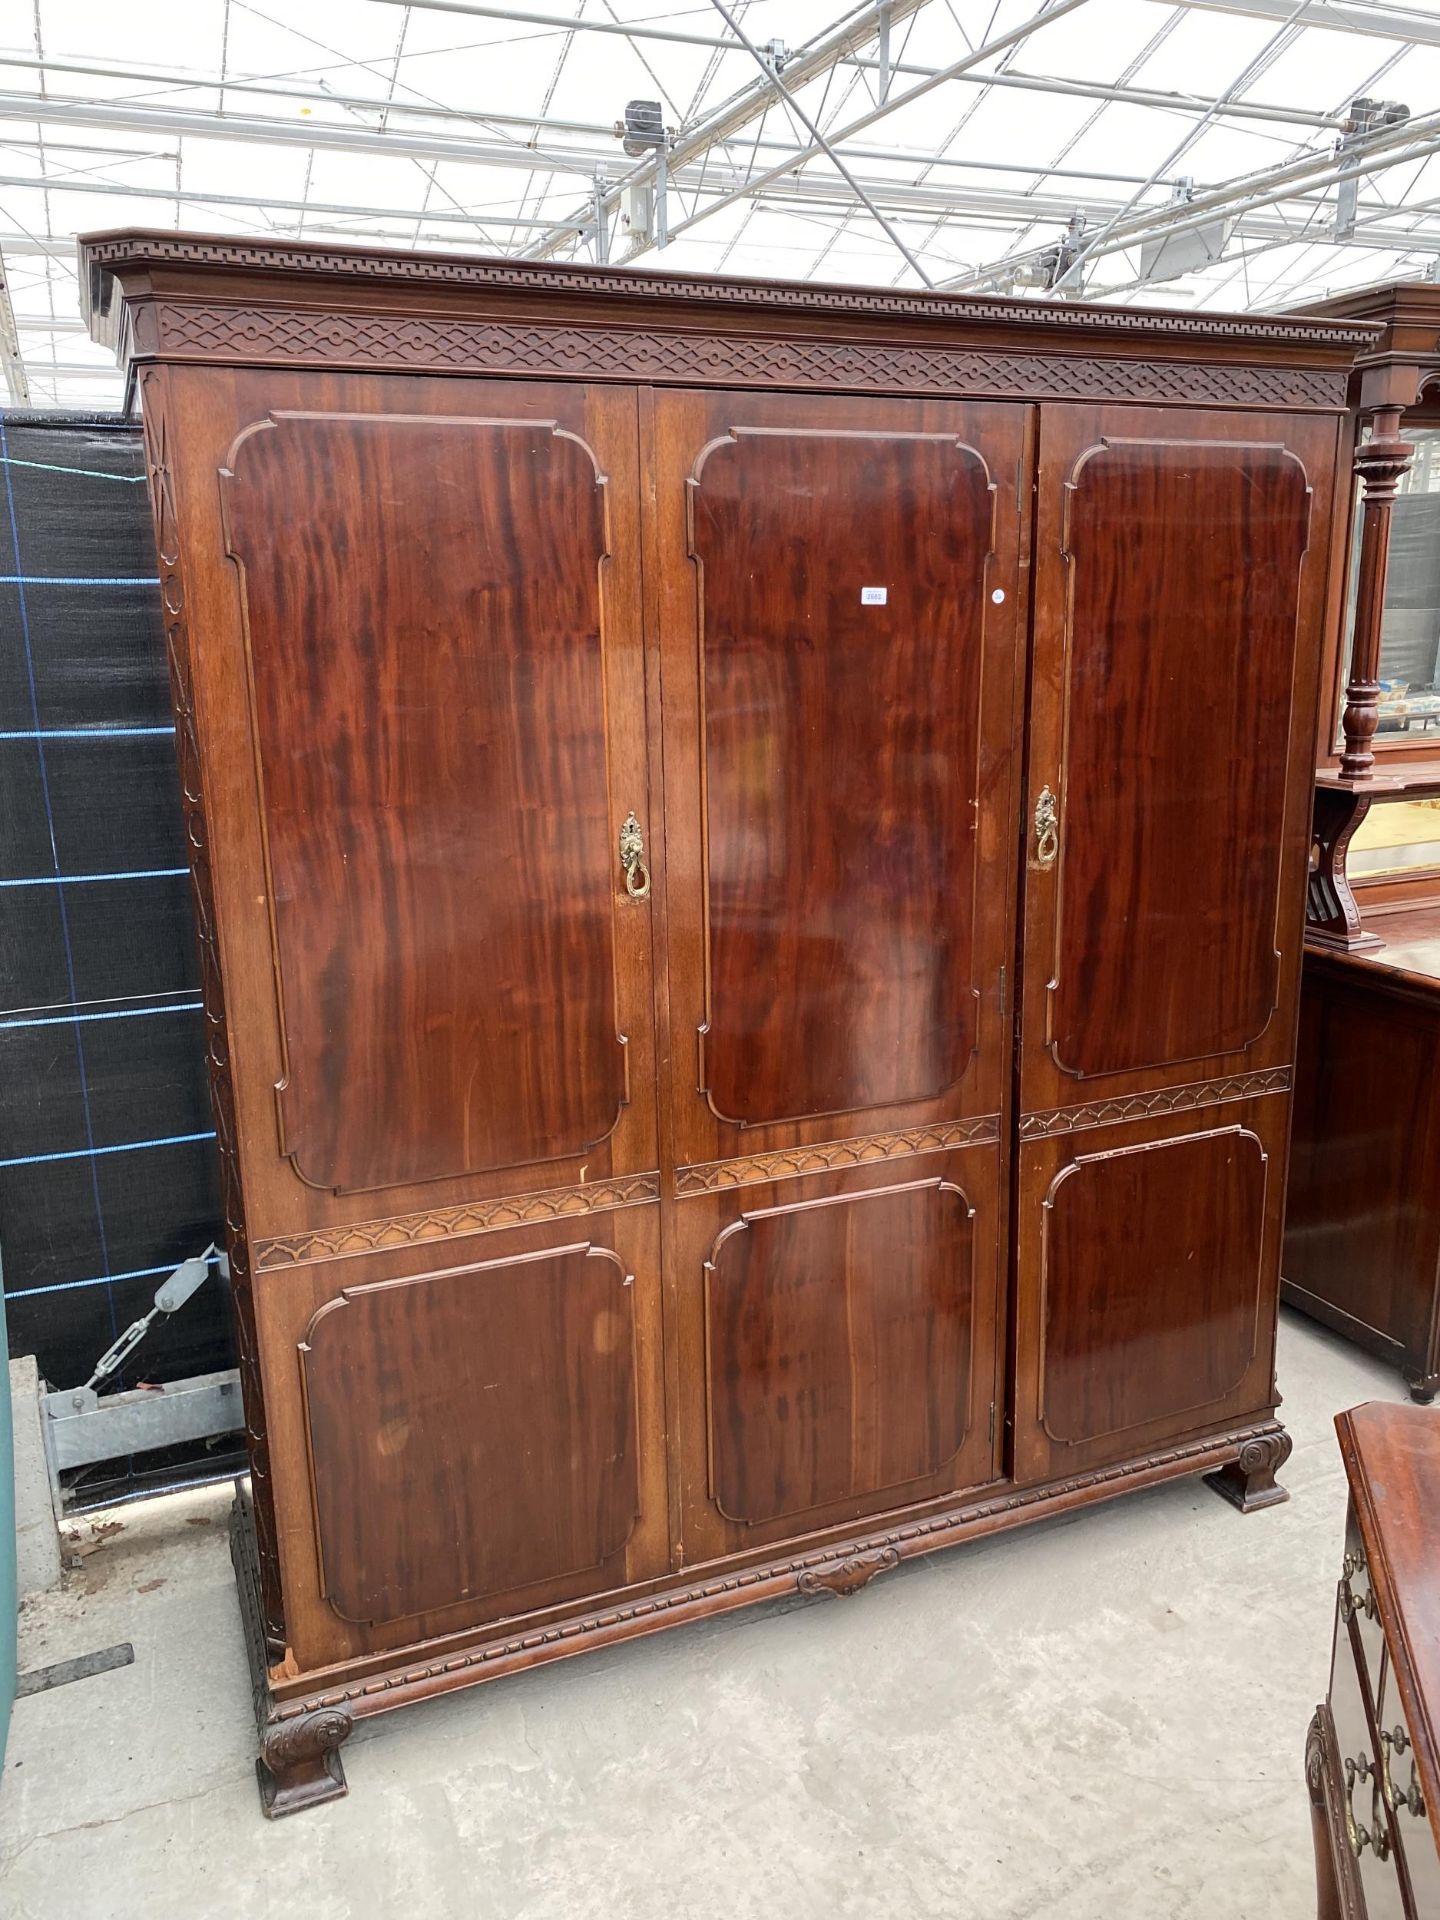 AN EDWARDIAN MAHOGANY 'CHIPPENDALE' STYLE TRIPLE WARDROBE ENCLOSING HANGING COMPARTMENTS, FIVE